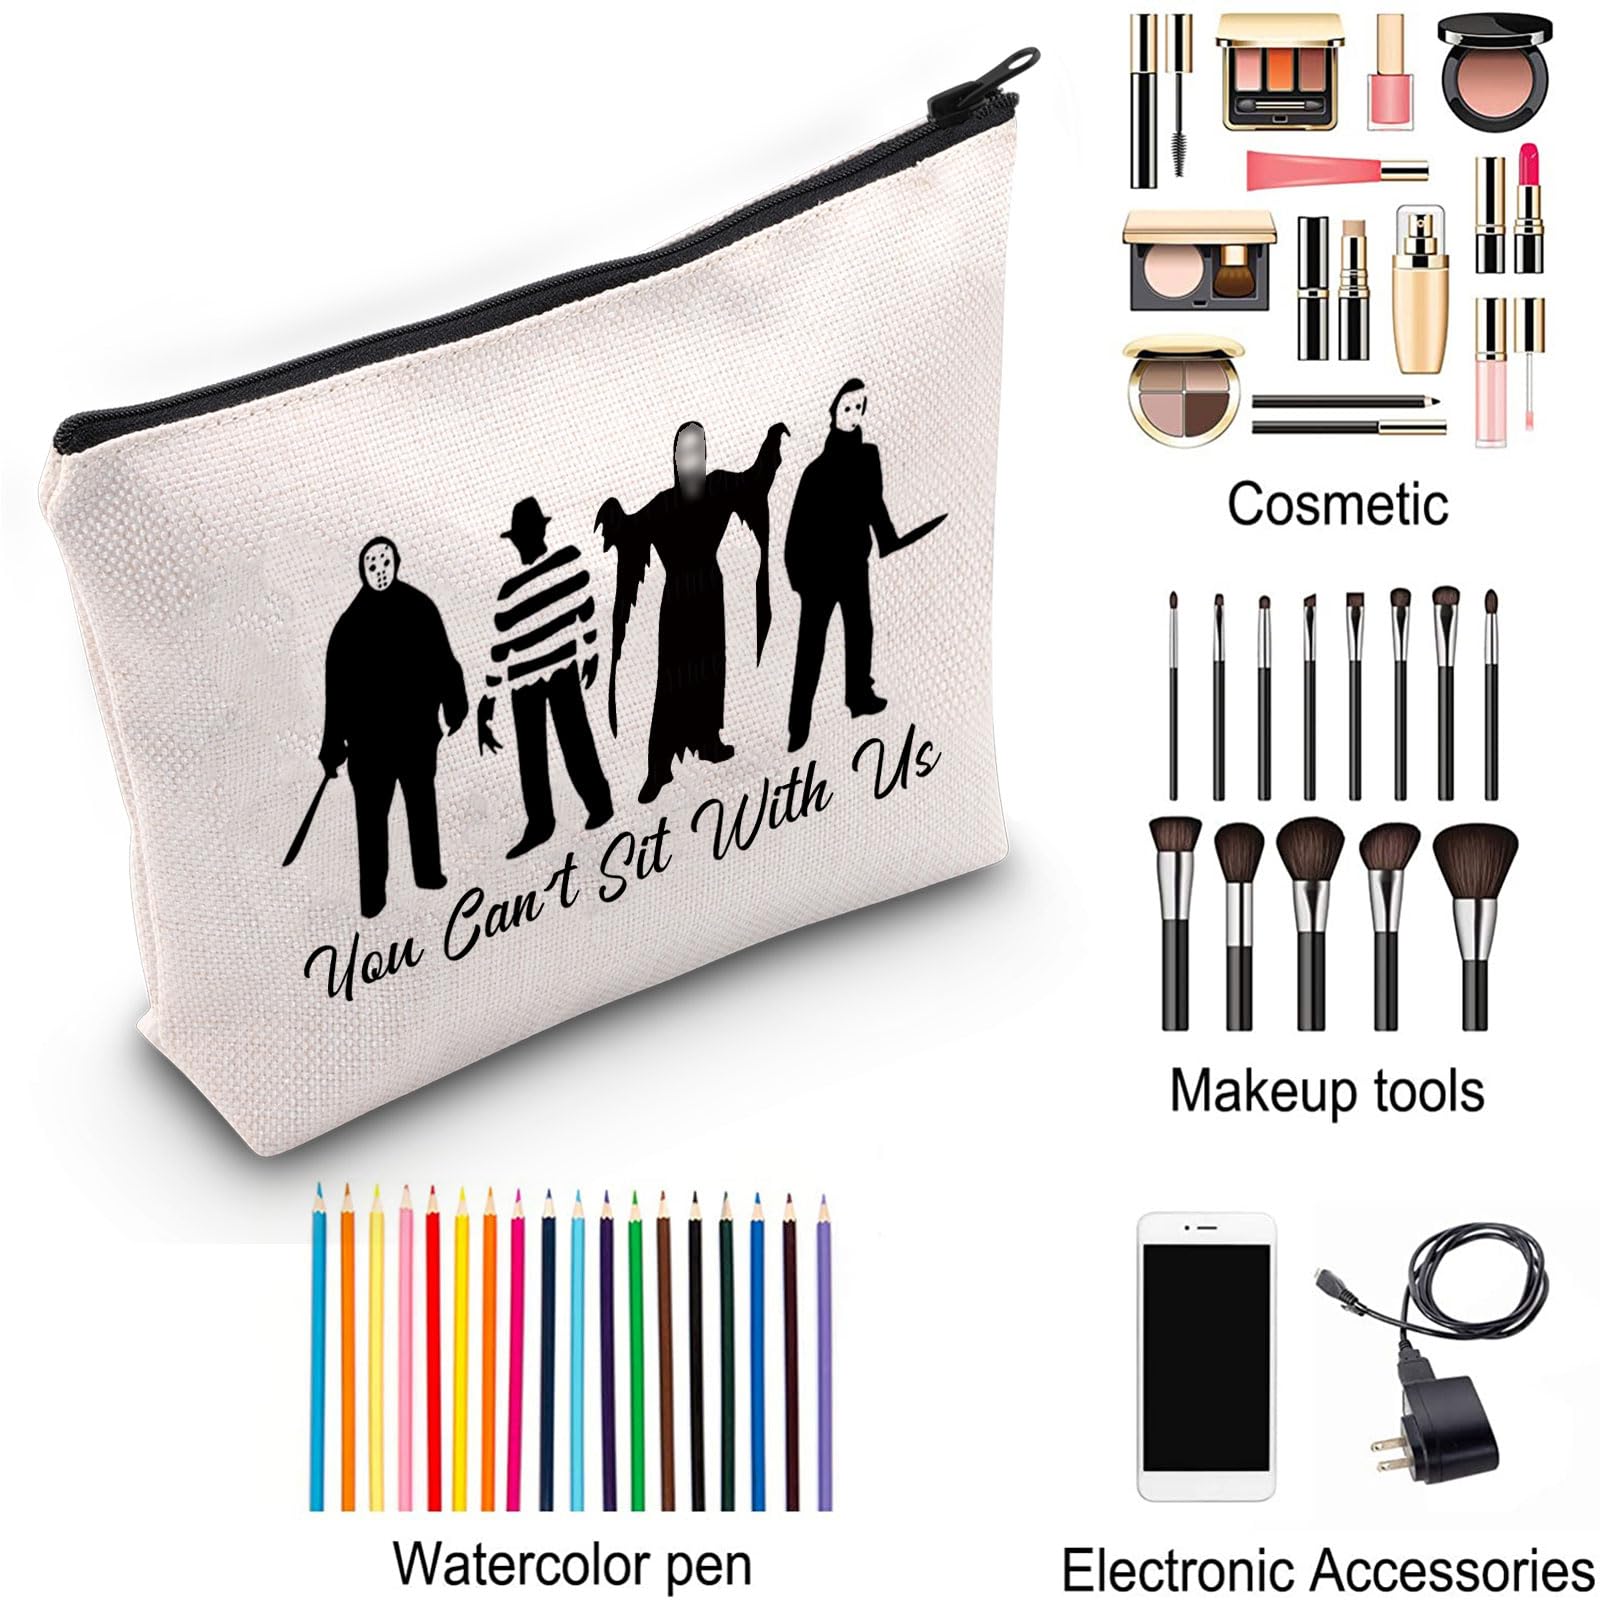 ZJXHPO Horror Movies Lover Gift You Cant Sit With Us Makeup Bag Horror Movie Fan Gift Horror Movie Canvas Tote Bag (Sit With Us 2)